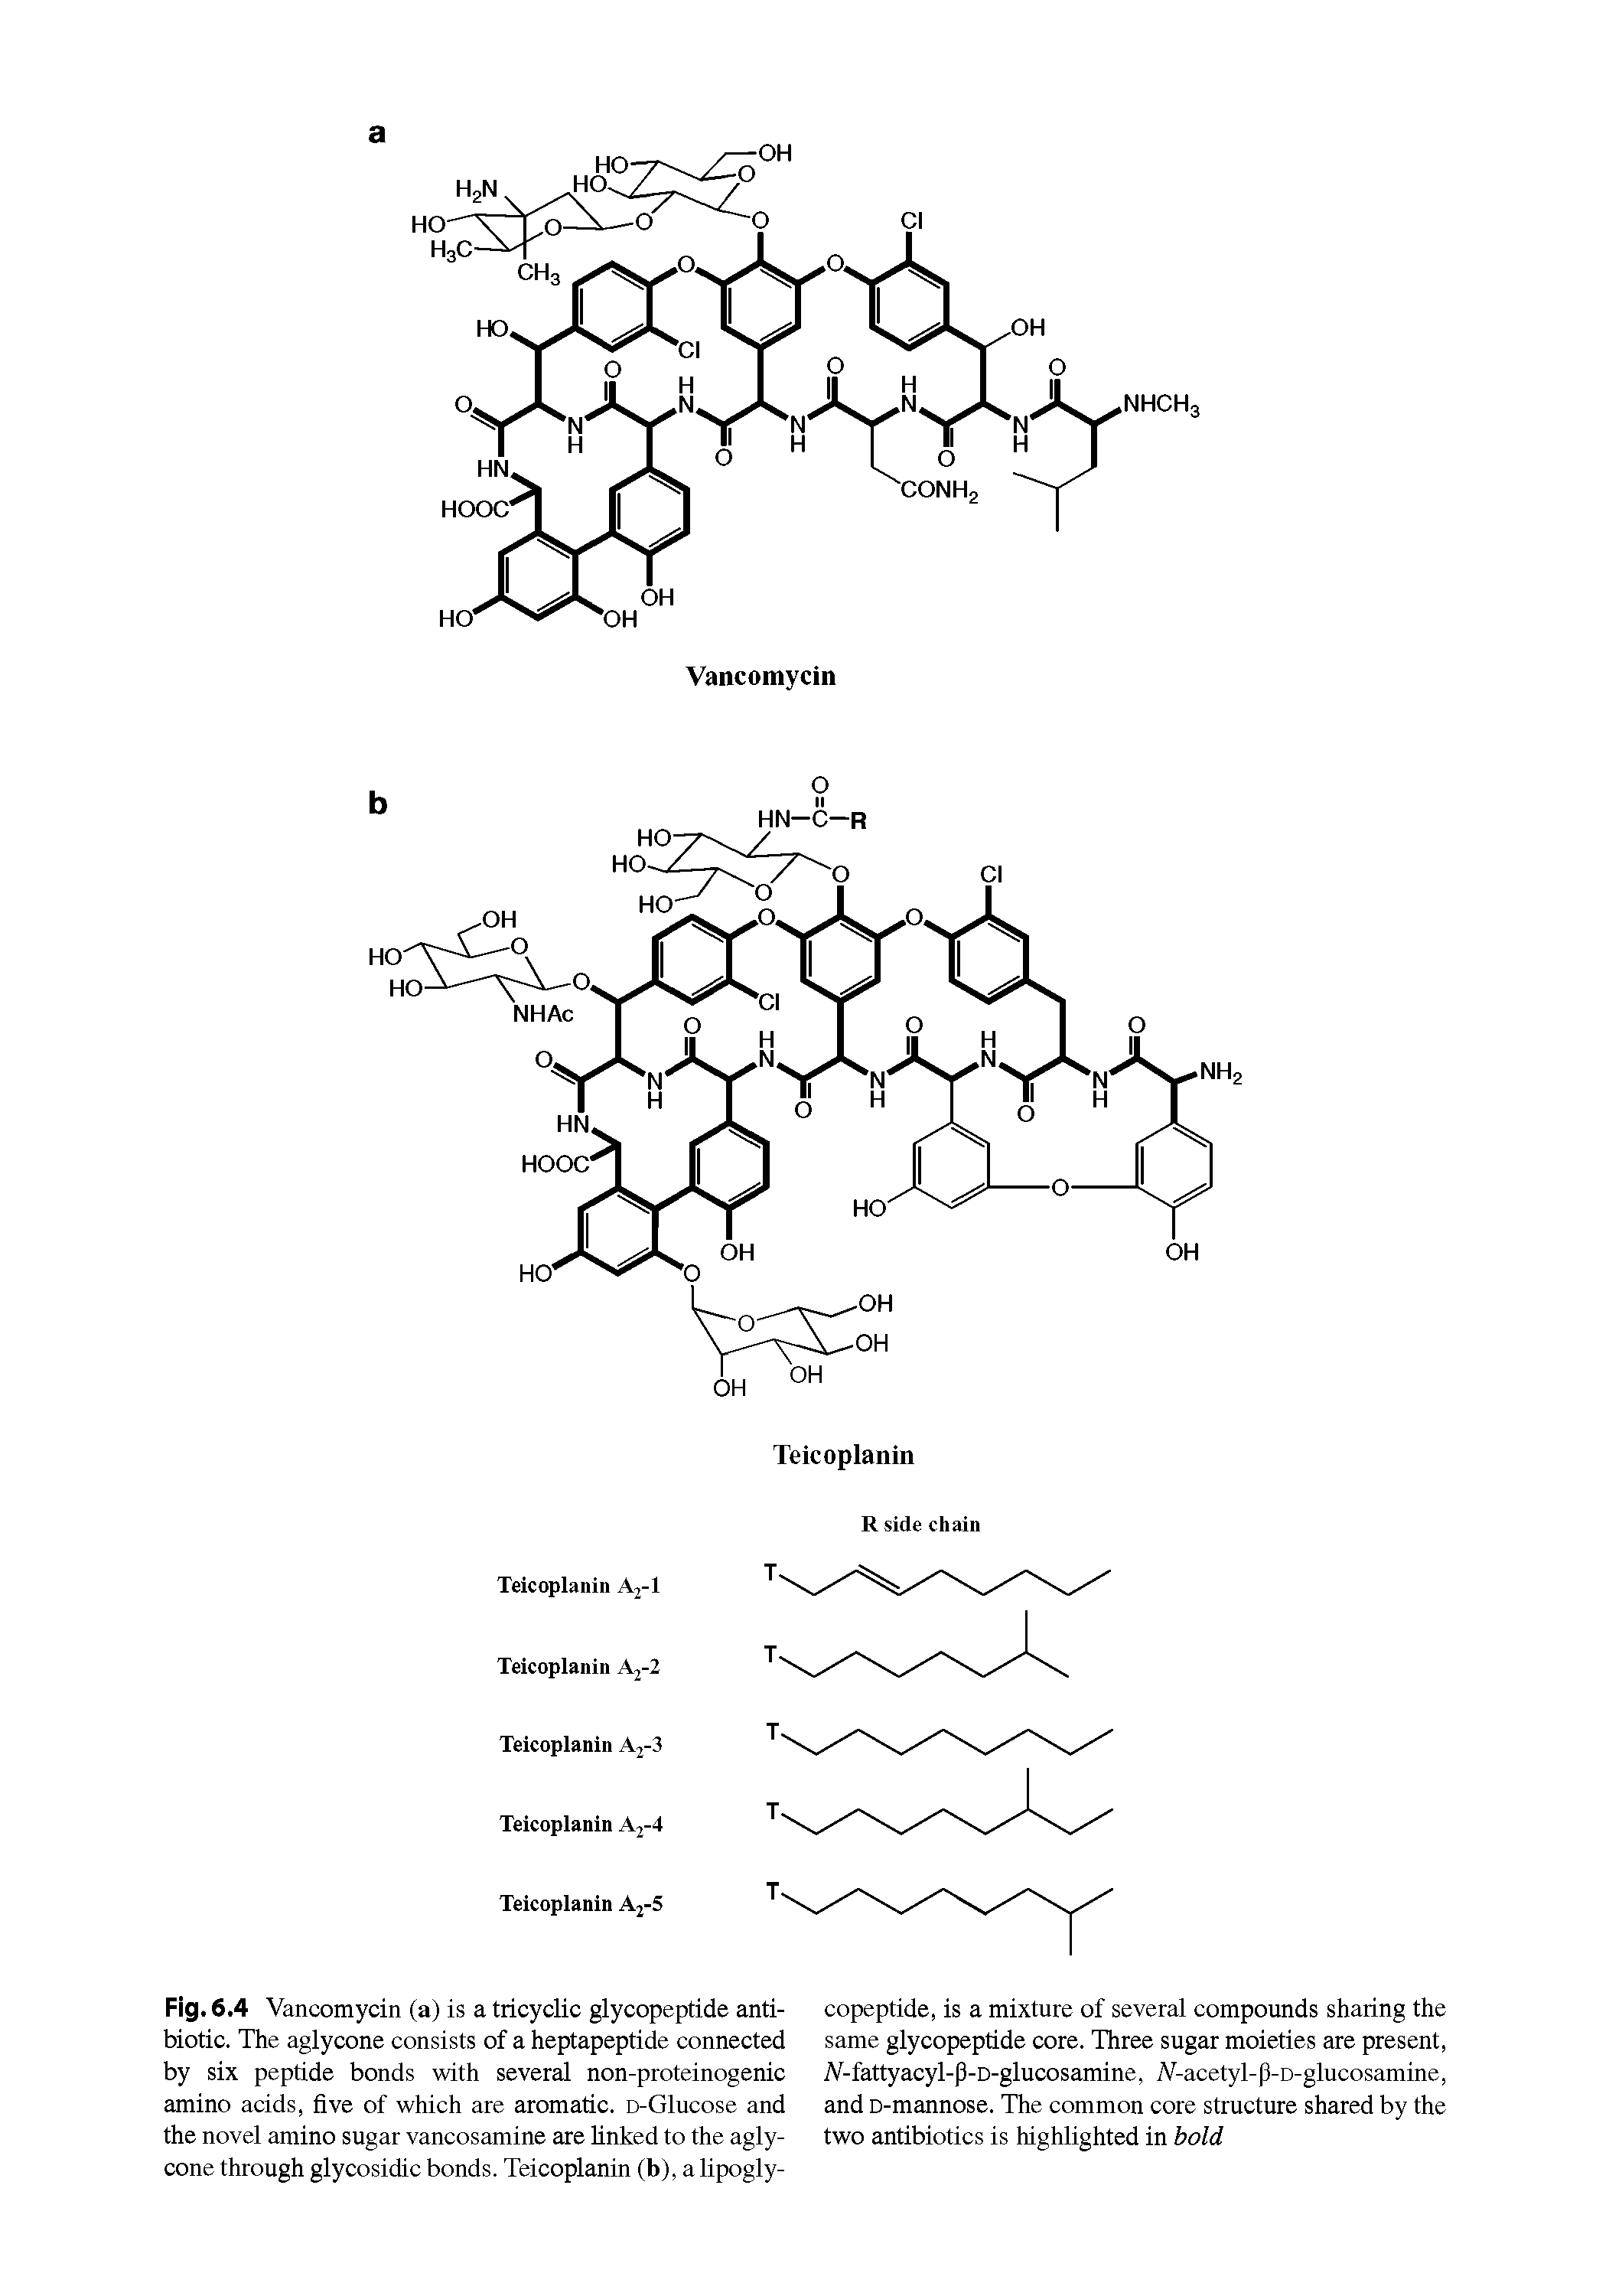 Fig. 6.4 Vancomycin (a) is a tricyclic glycopeptide antibiotic. The aglycone consists of a heptapeptide connected by six peptide bonds with several non-proteinogenic amino acids, five of which are aromatic. o-Glucose and the novel amino sugar vancosamine are linked to the aglycone through glycosidic bonds. Teicoplanin (b), a lipogly-...